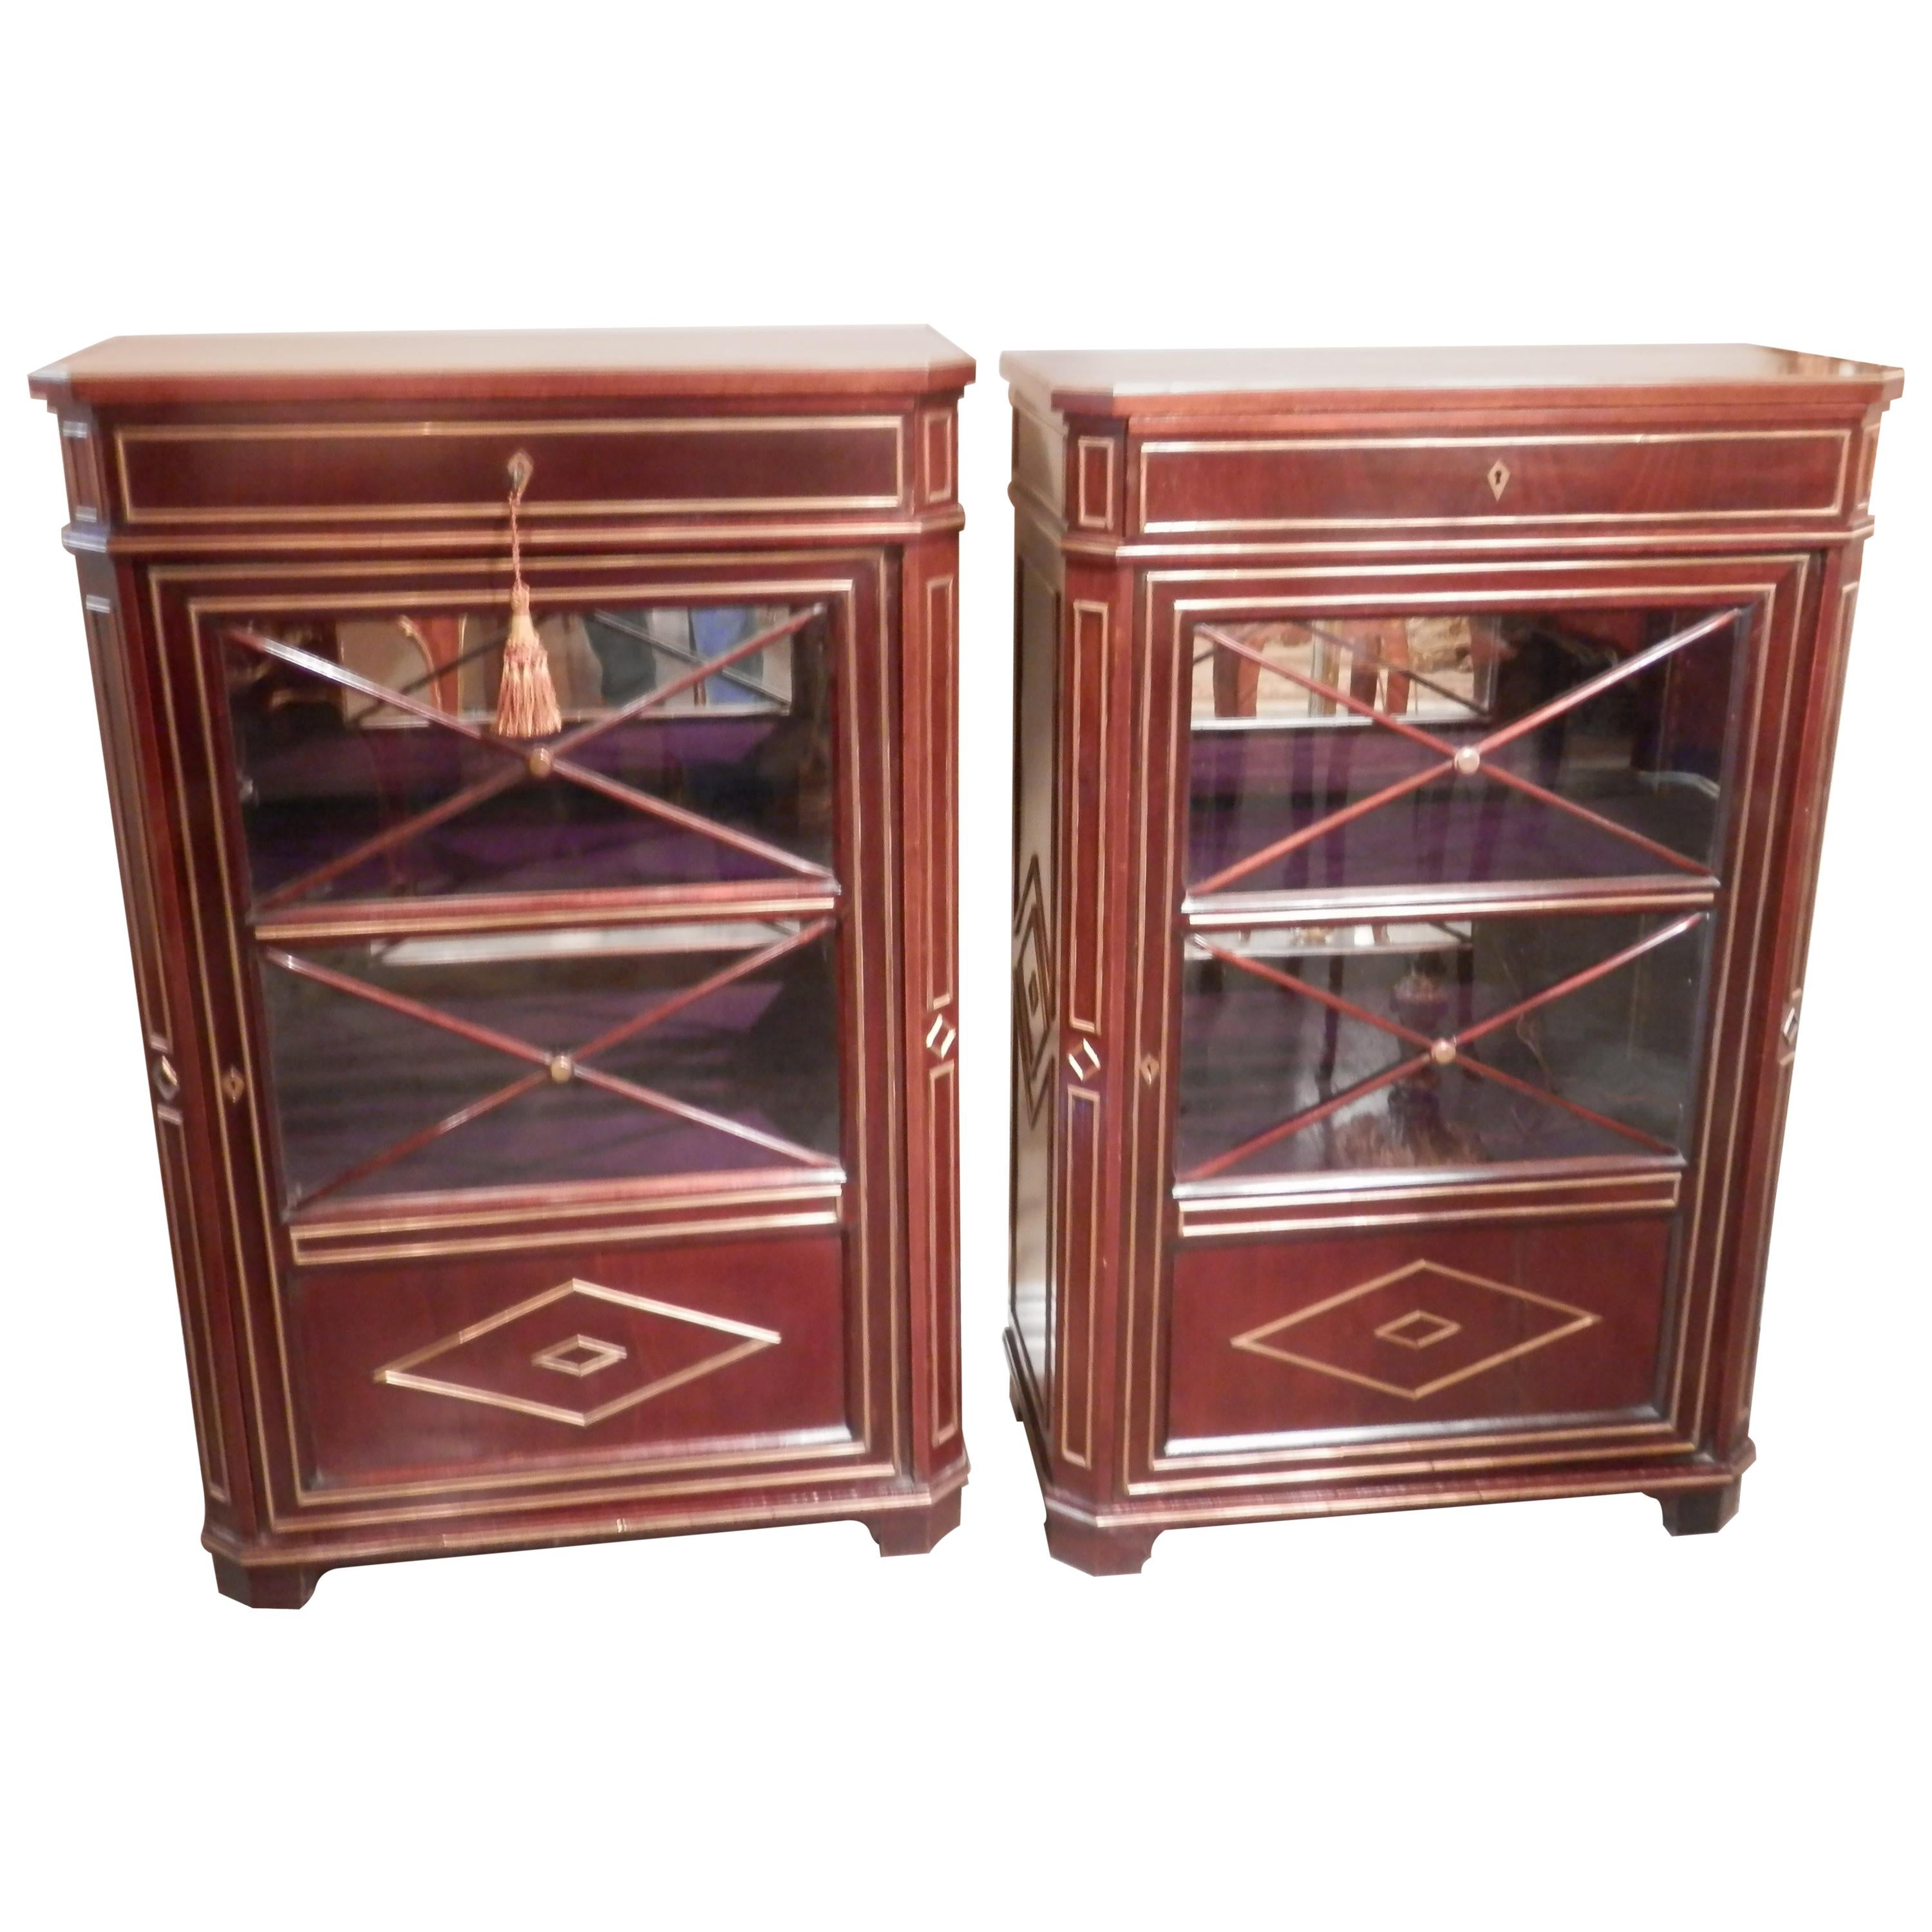 Pair of 19th Century Russian Mahogany and Brass Inlayed Cabinets For Sale